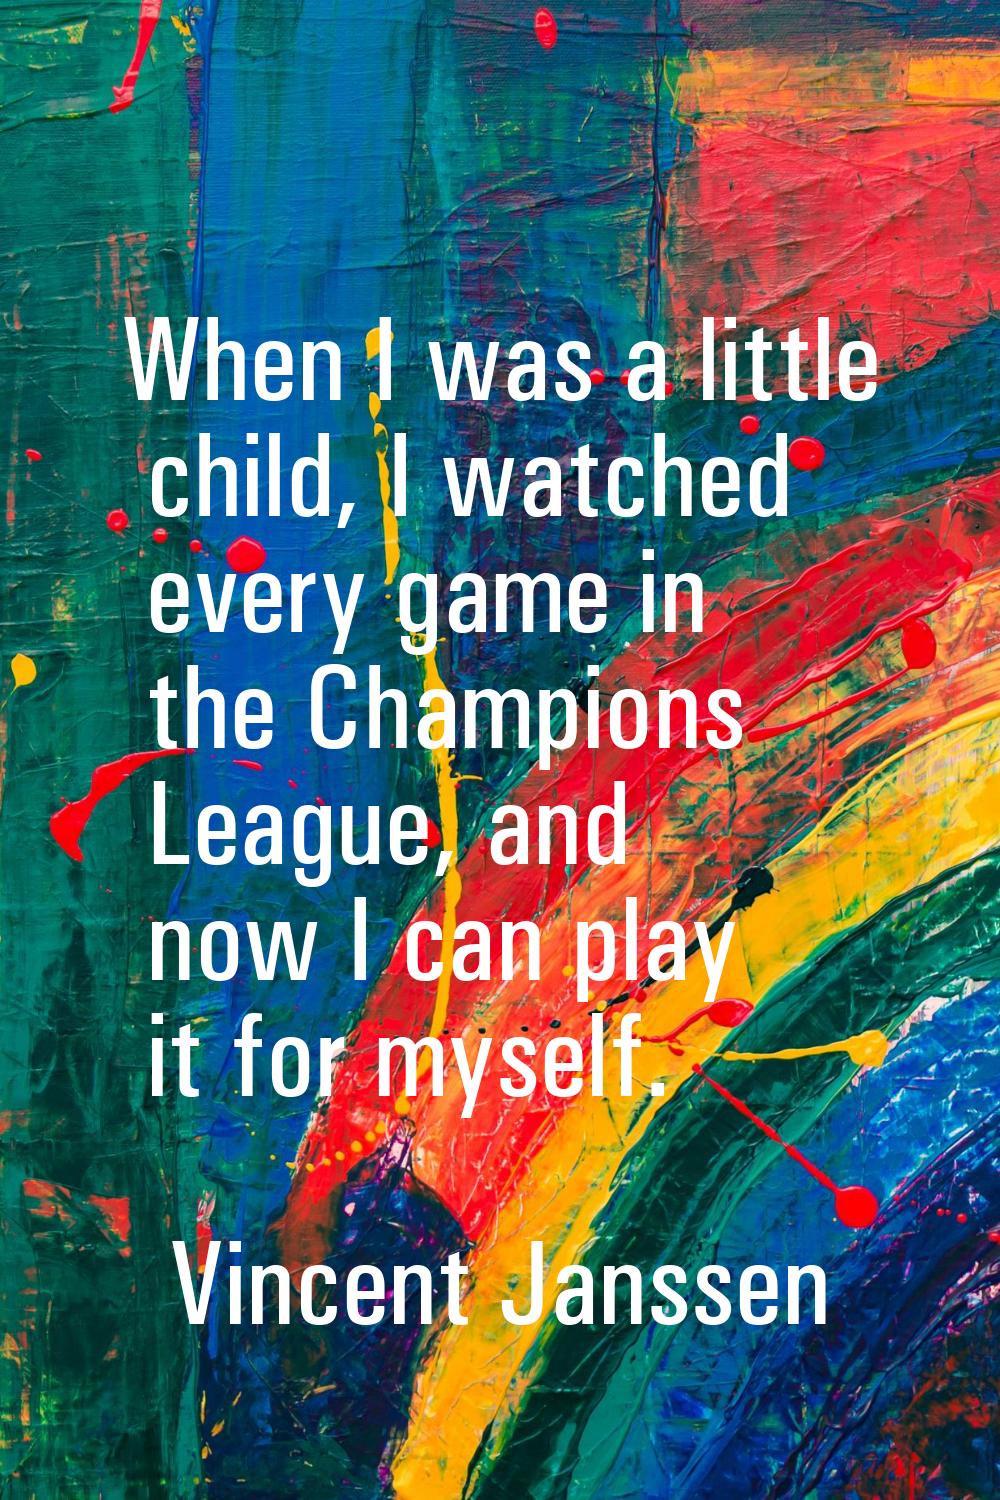 When I was a little child, I watched every game in the Champions League, and now I can play it for 